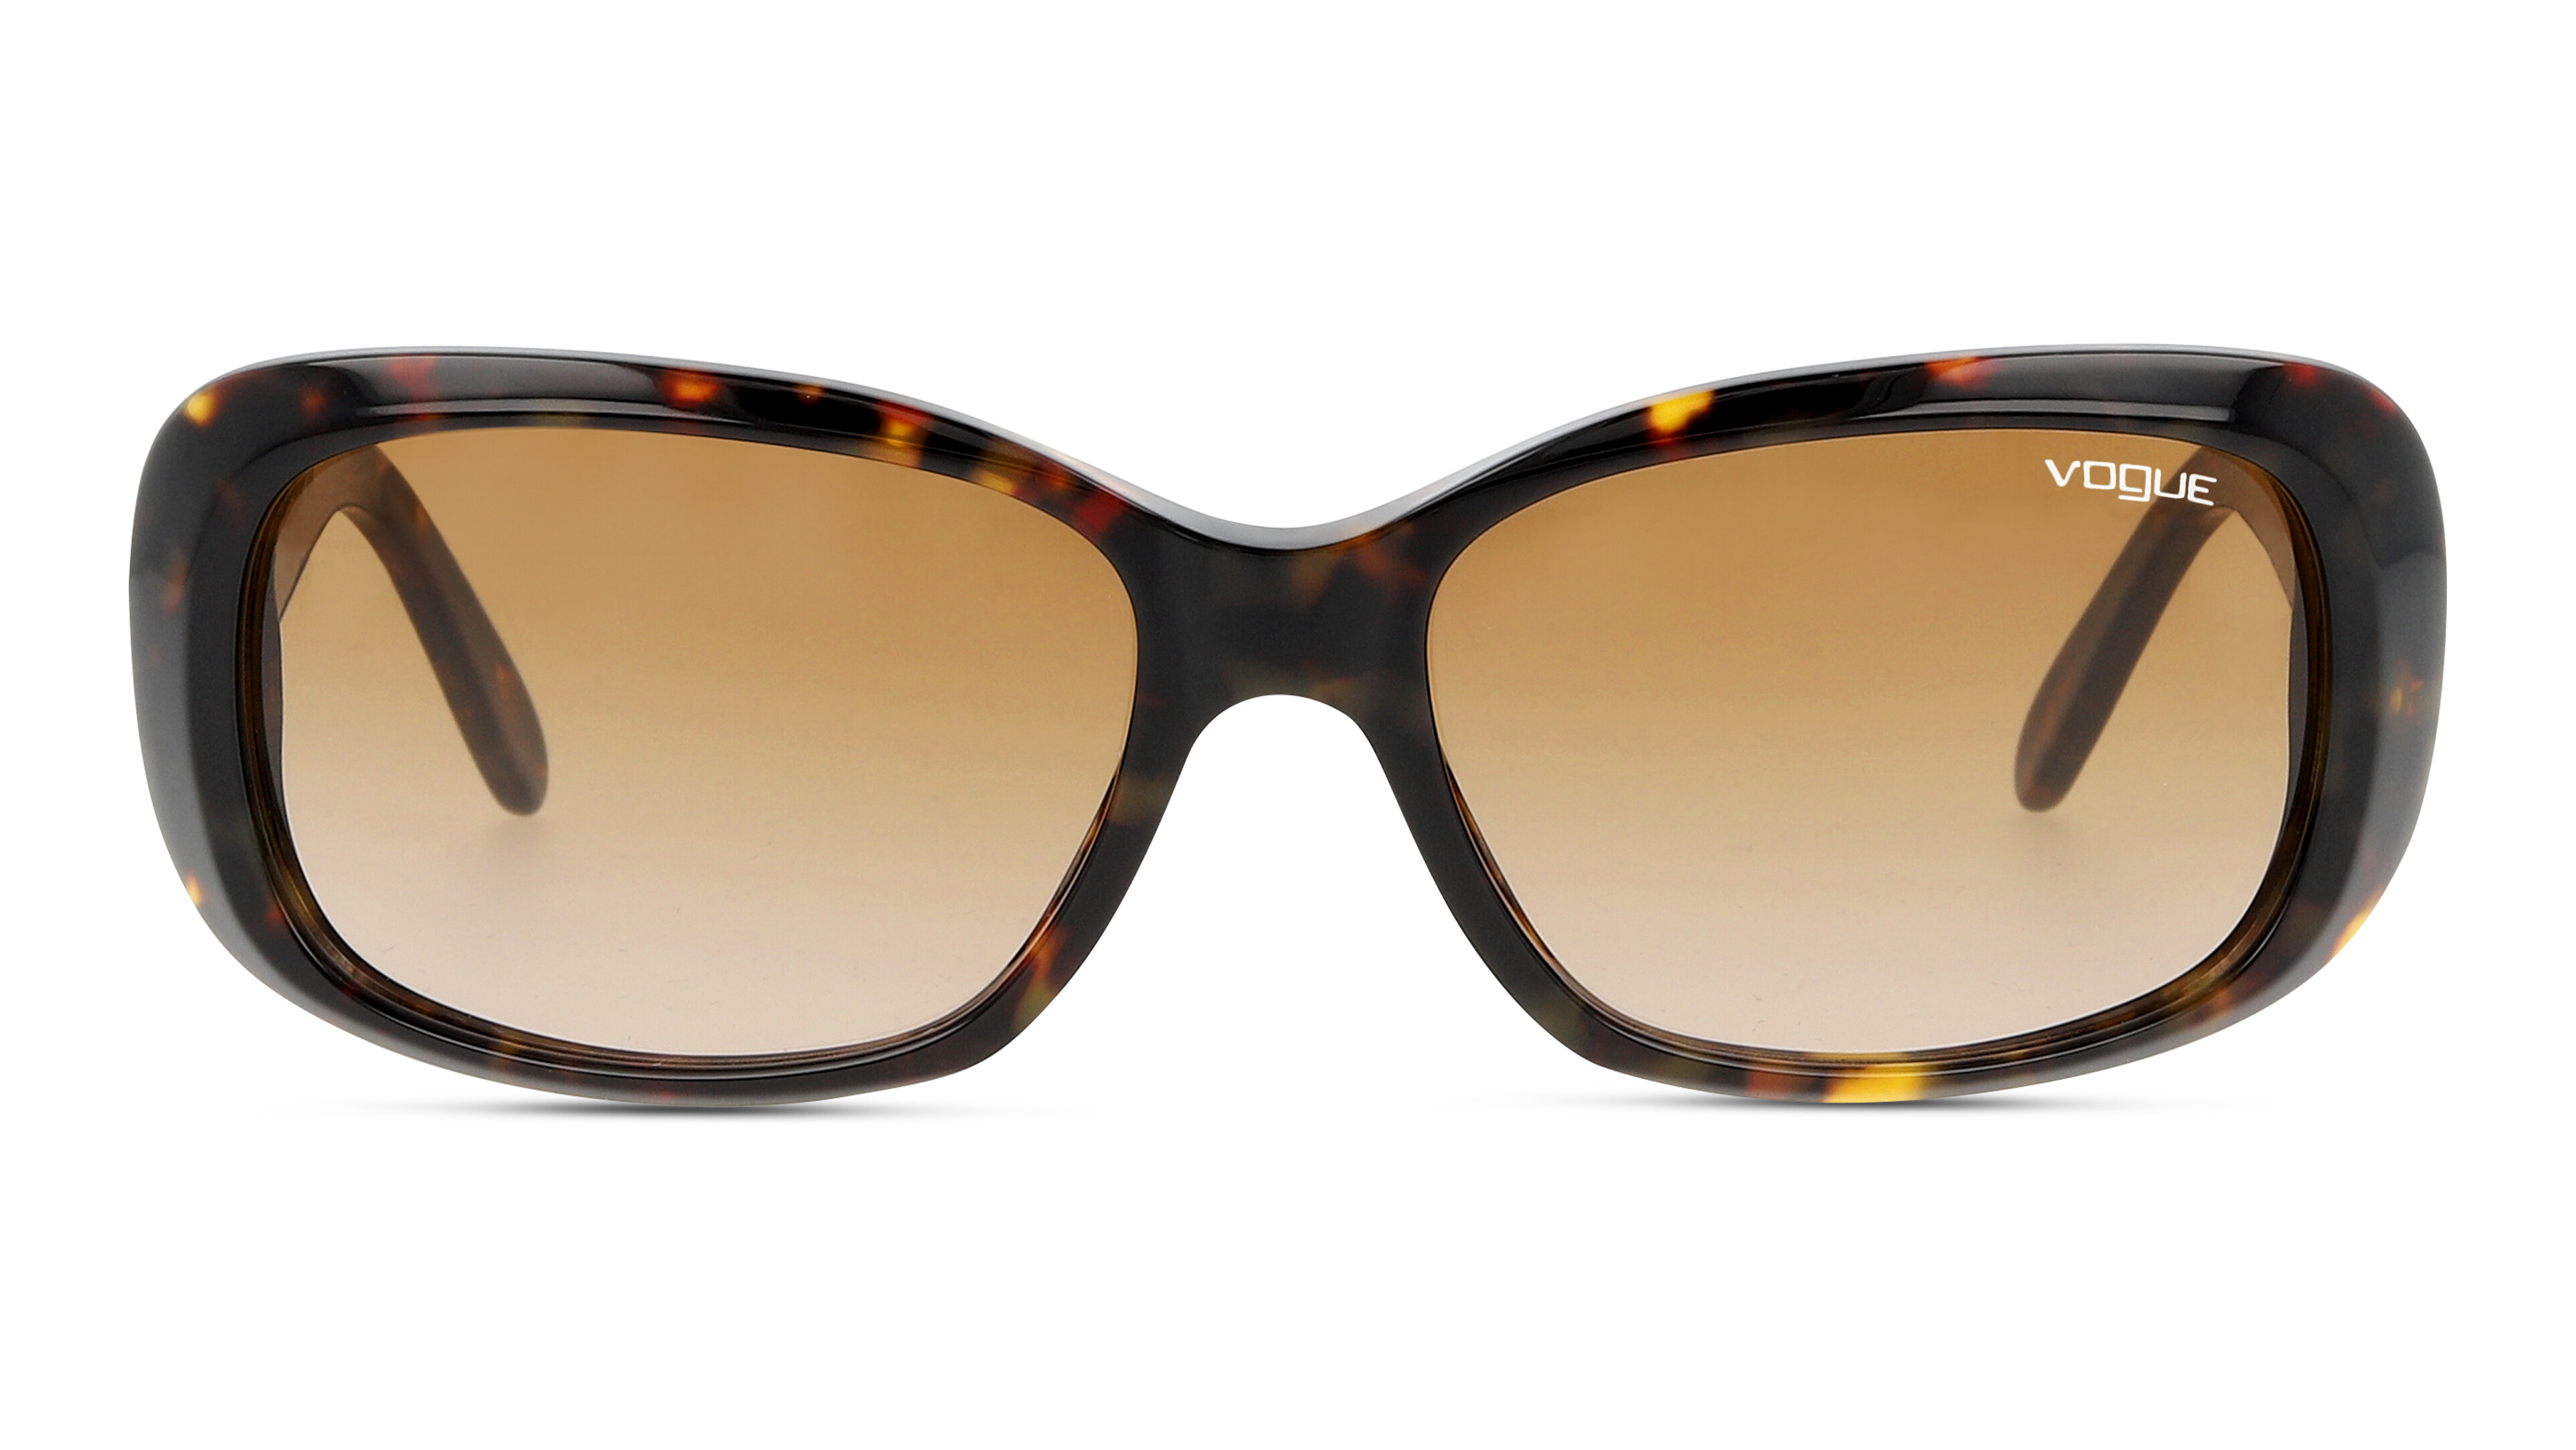 [products.image.front] Vogue 0VO2606S W65613 Sonnenbrille